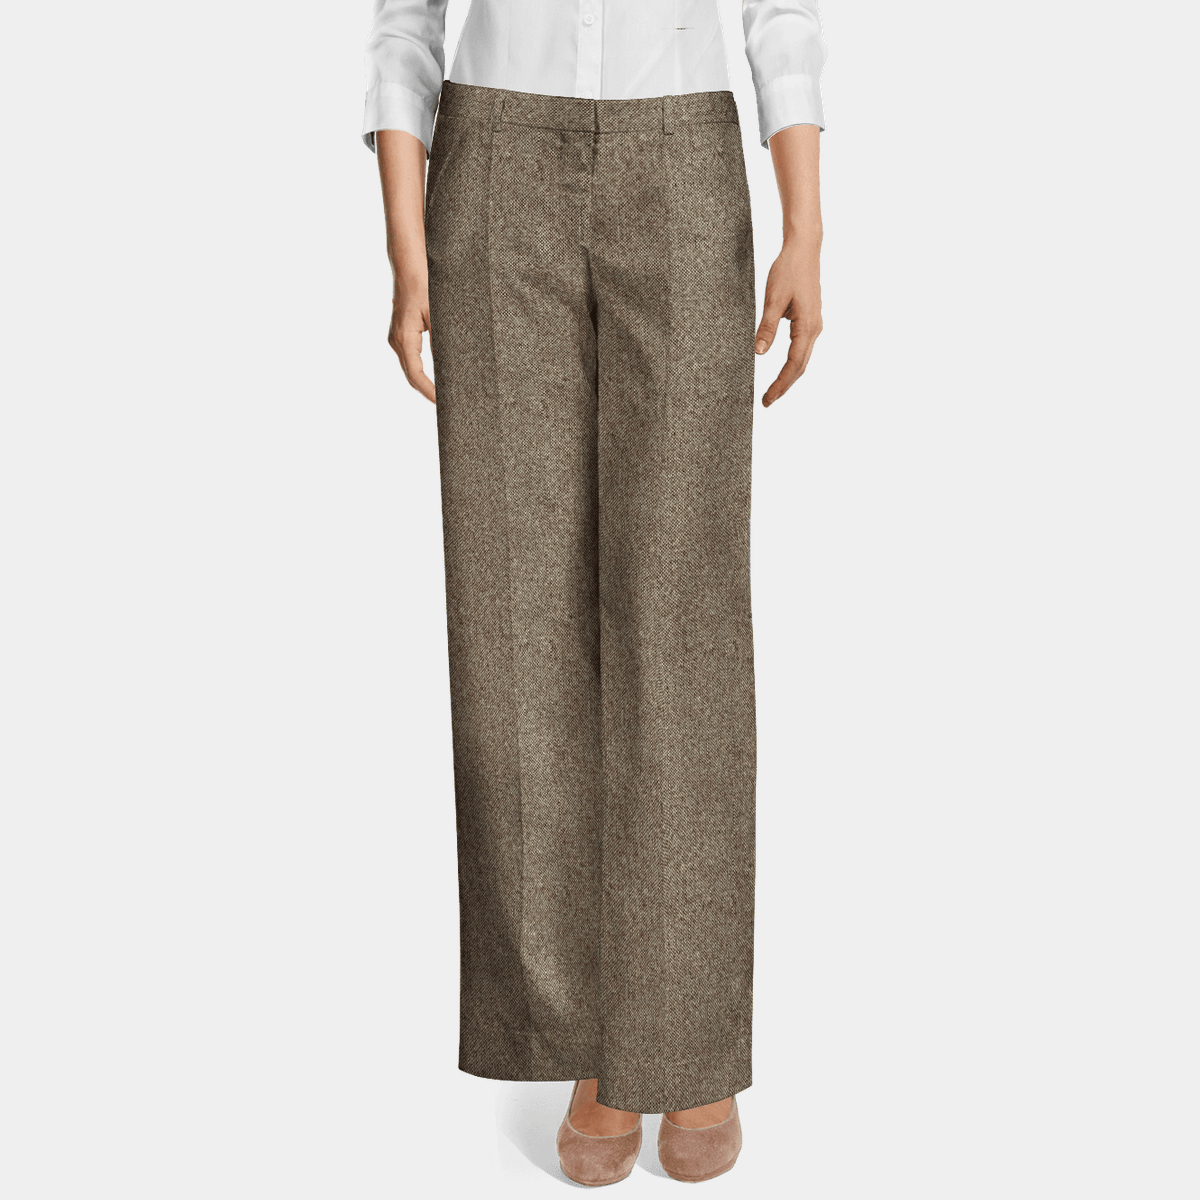 Camel donegal tweed high waisted pleated cuffed Cigarette Pants